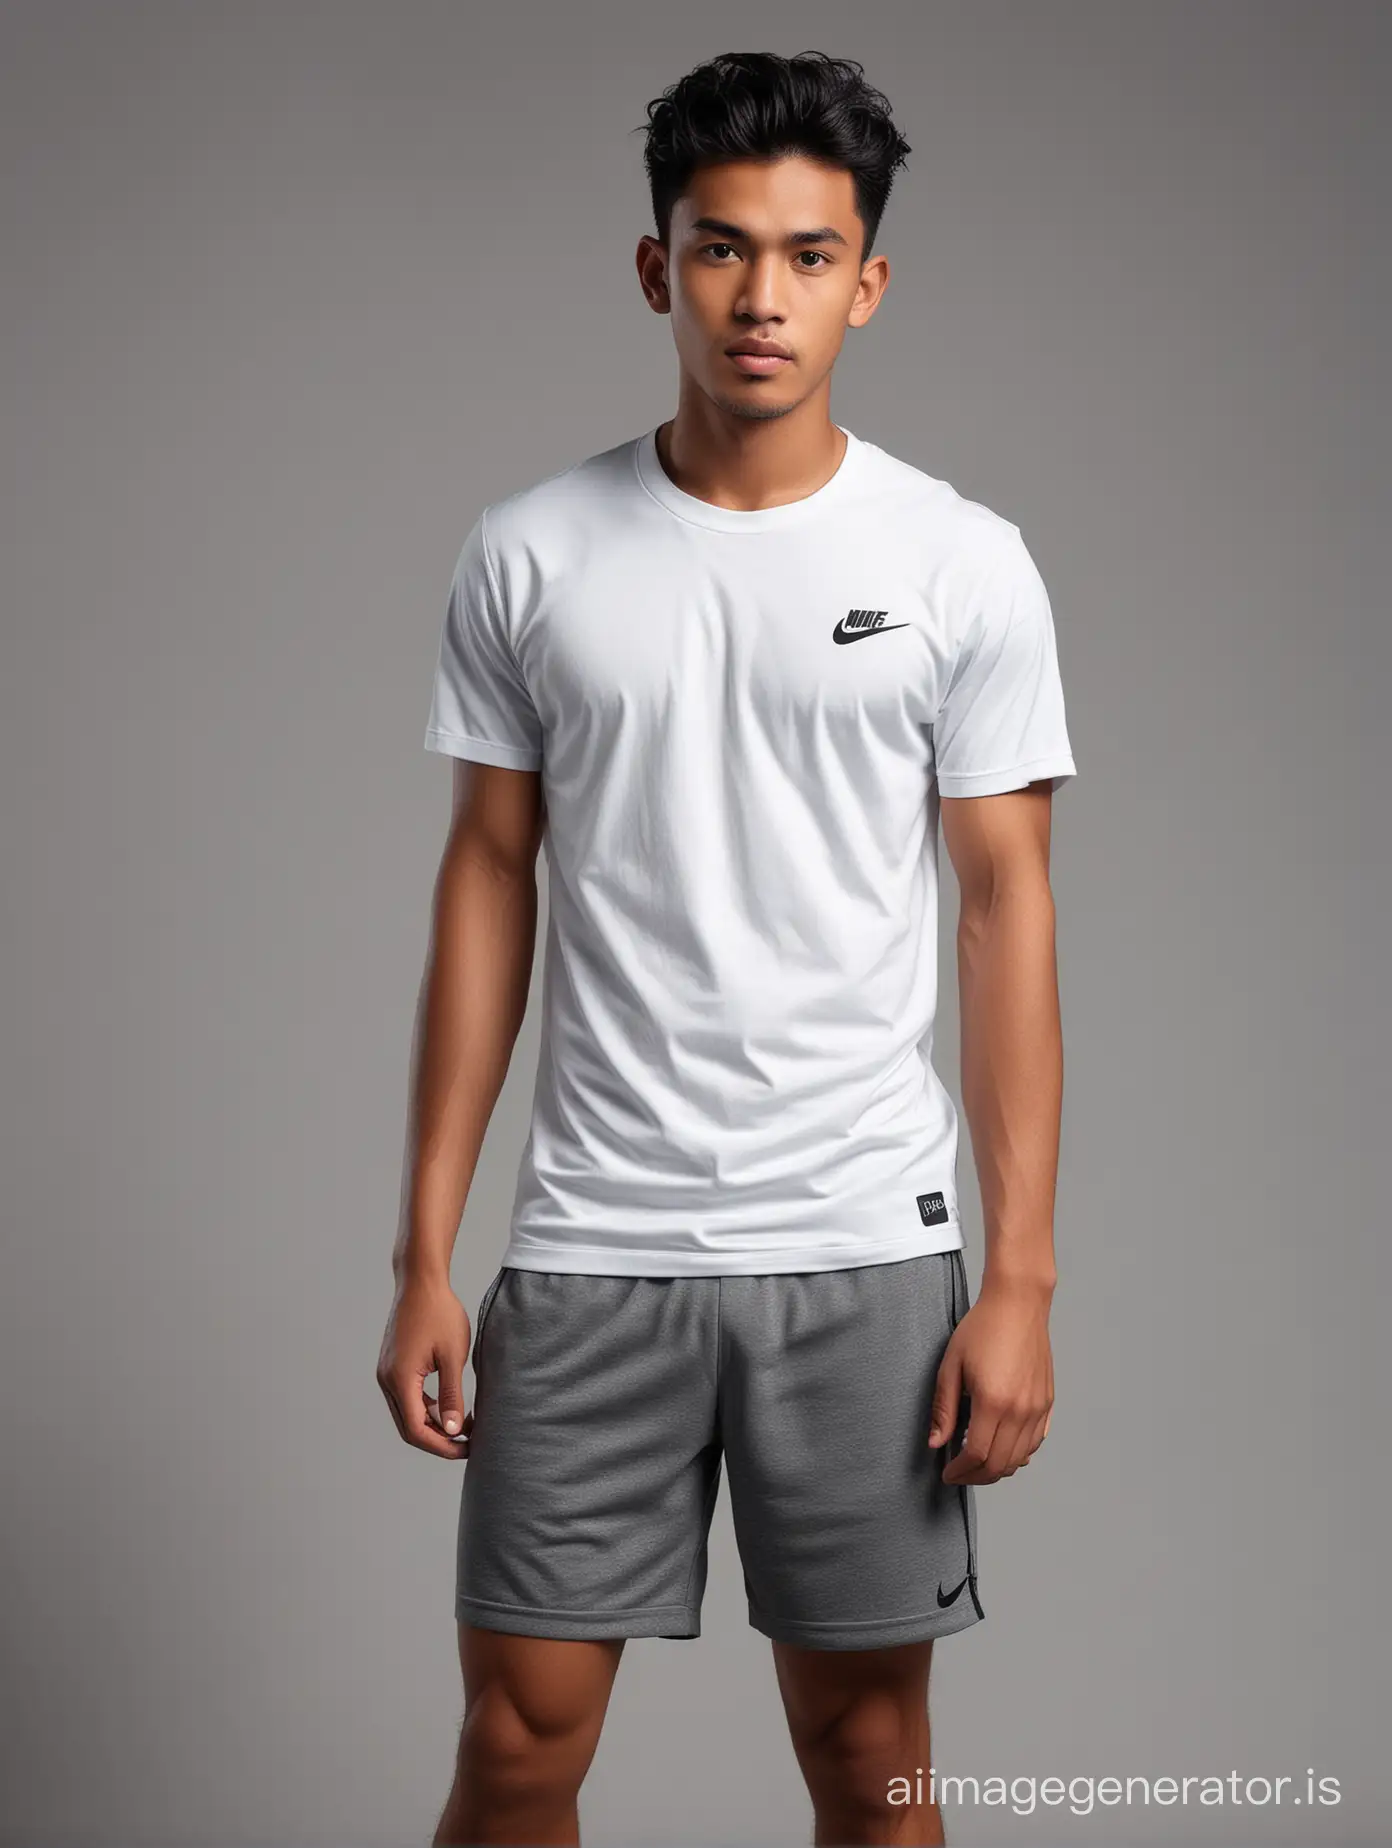 A handsome young indonesian, wearing white fit tee shirt nike, with grey nike underwear boxer. Standing for photoshot, of nike white sneakers. Black short hair with skin head style, a little curly. Macho and cute photo. Background charcoal black. 16K UHD.